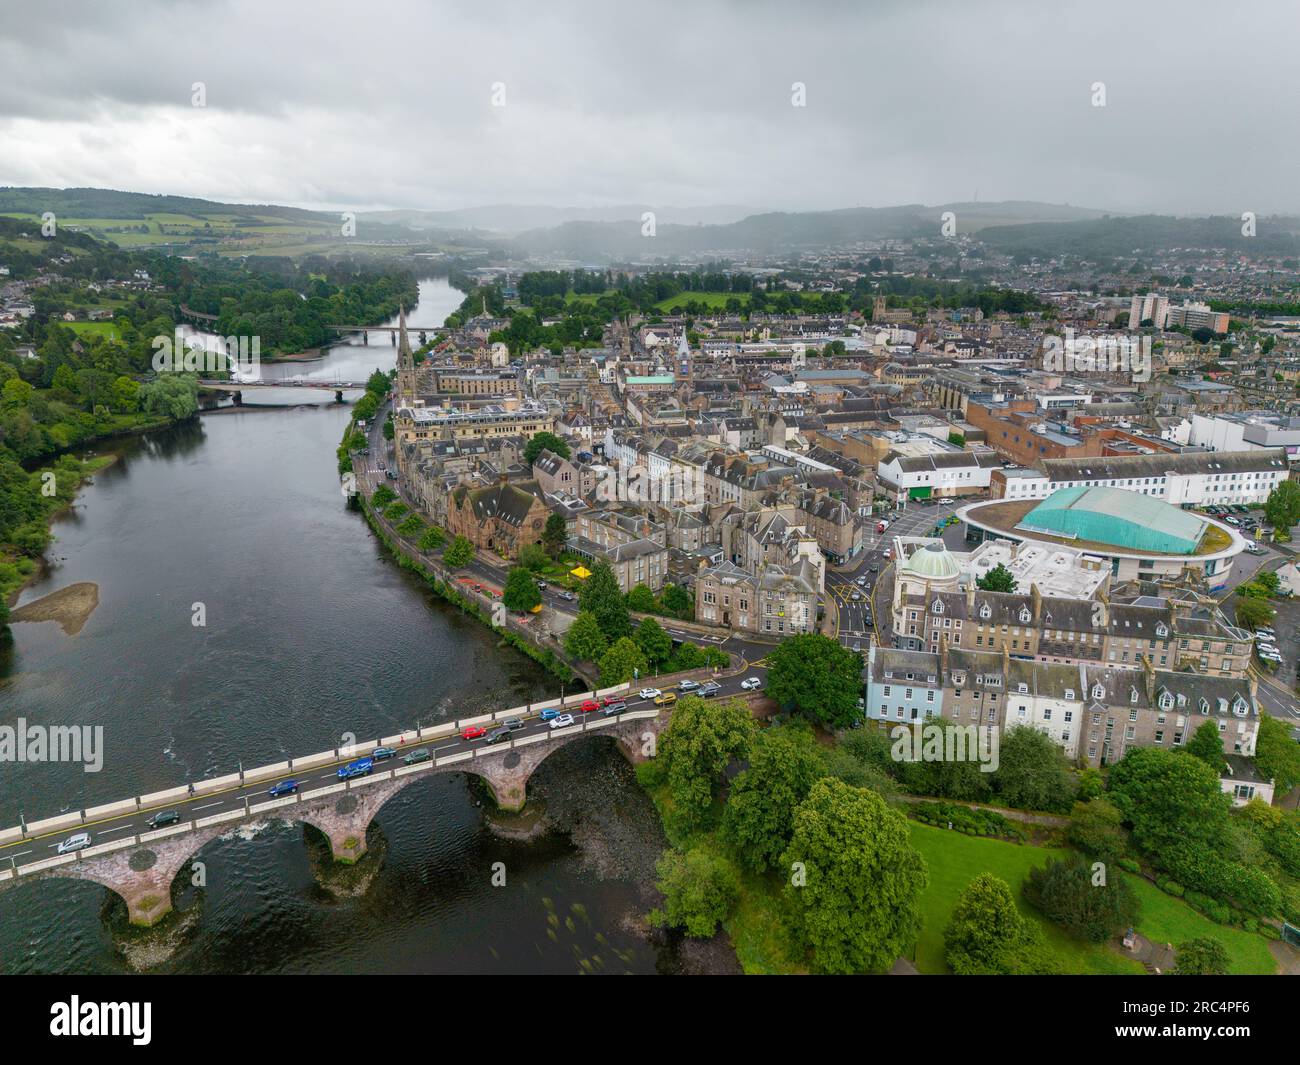 Aerial drone photo of the city Perth in Scotland. There is a large river running along the city centre with a bridge. Stock Photo